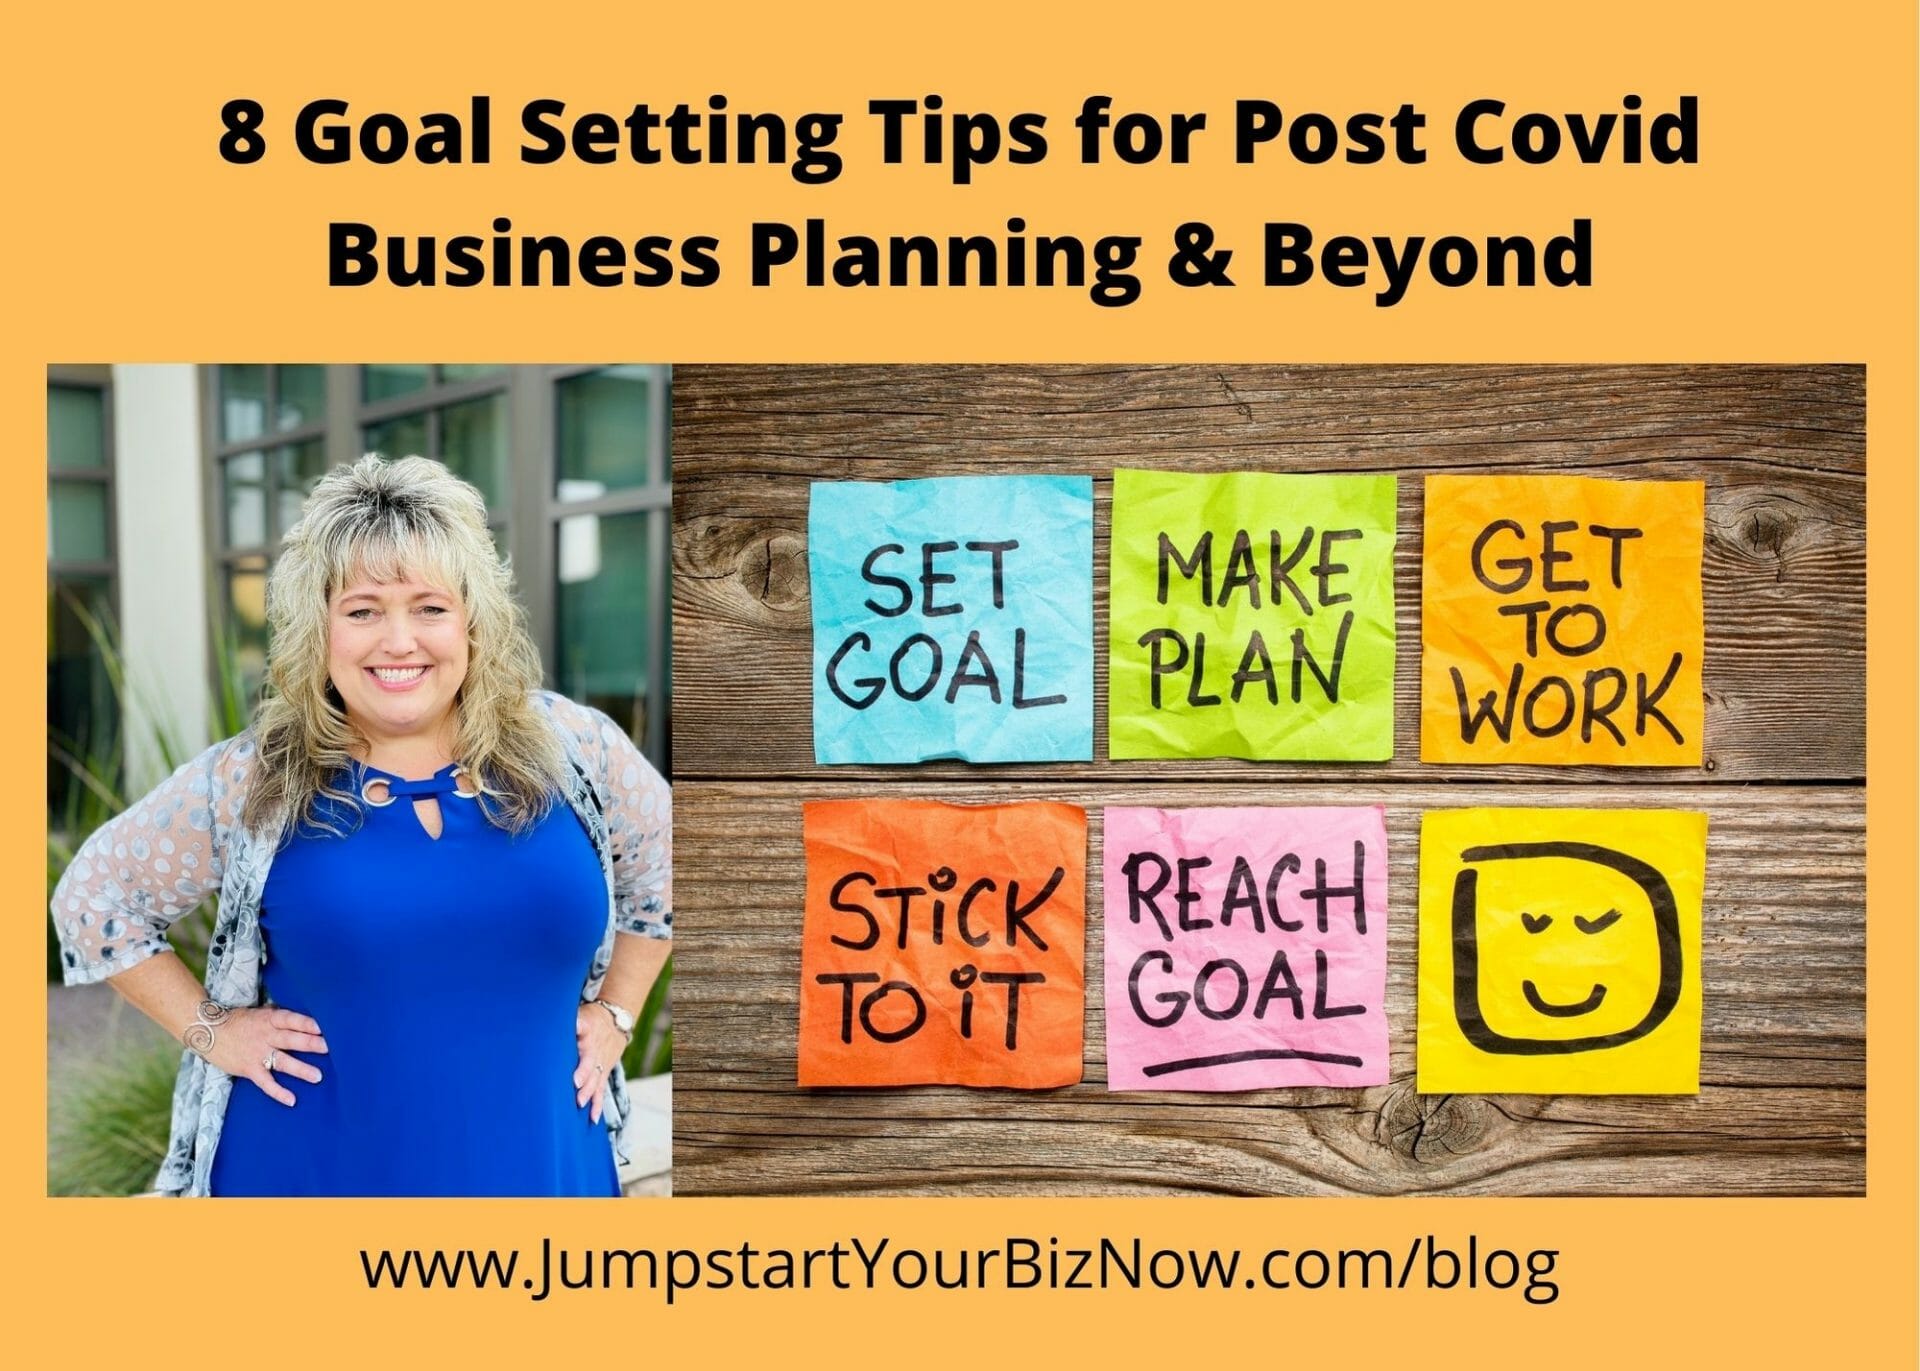 8 Goal Setting Tips for Post Covid Business Planning & Beyond